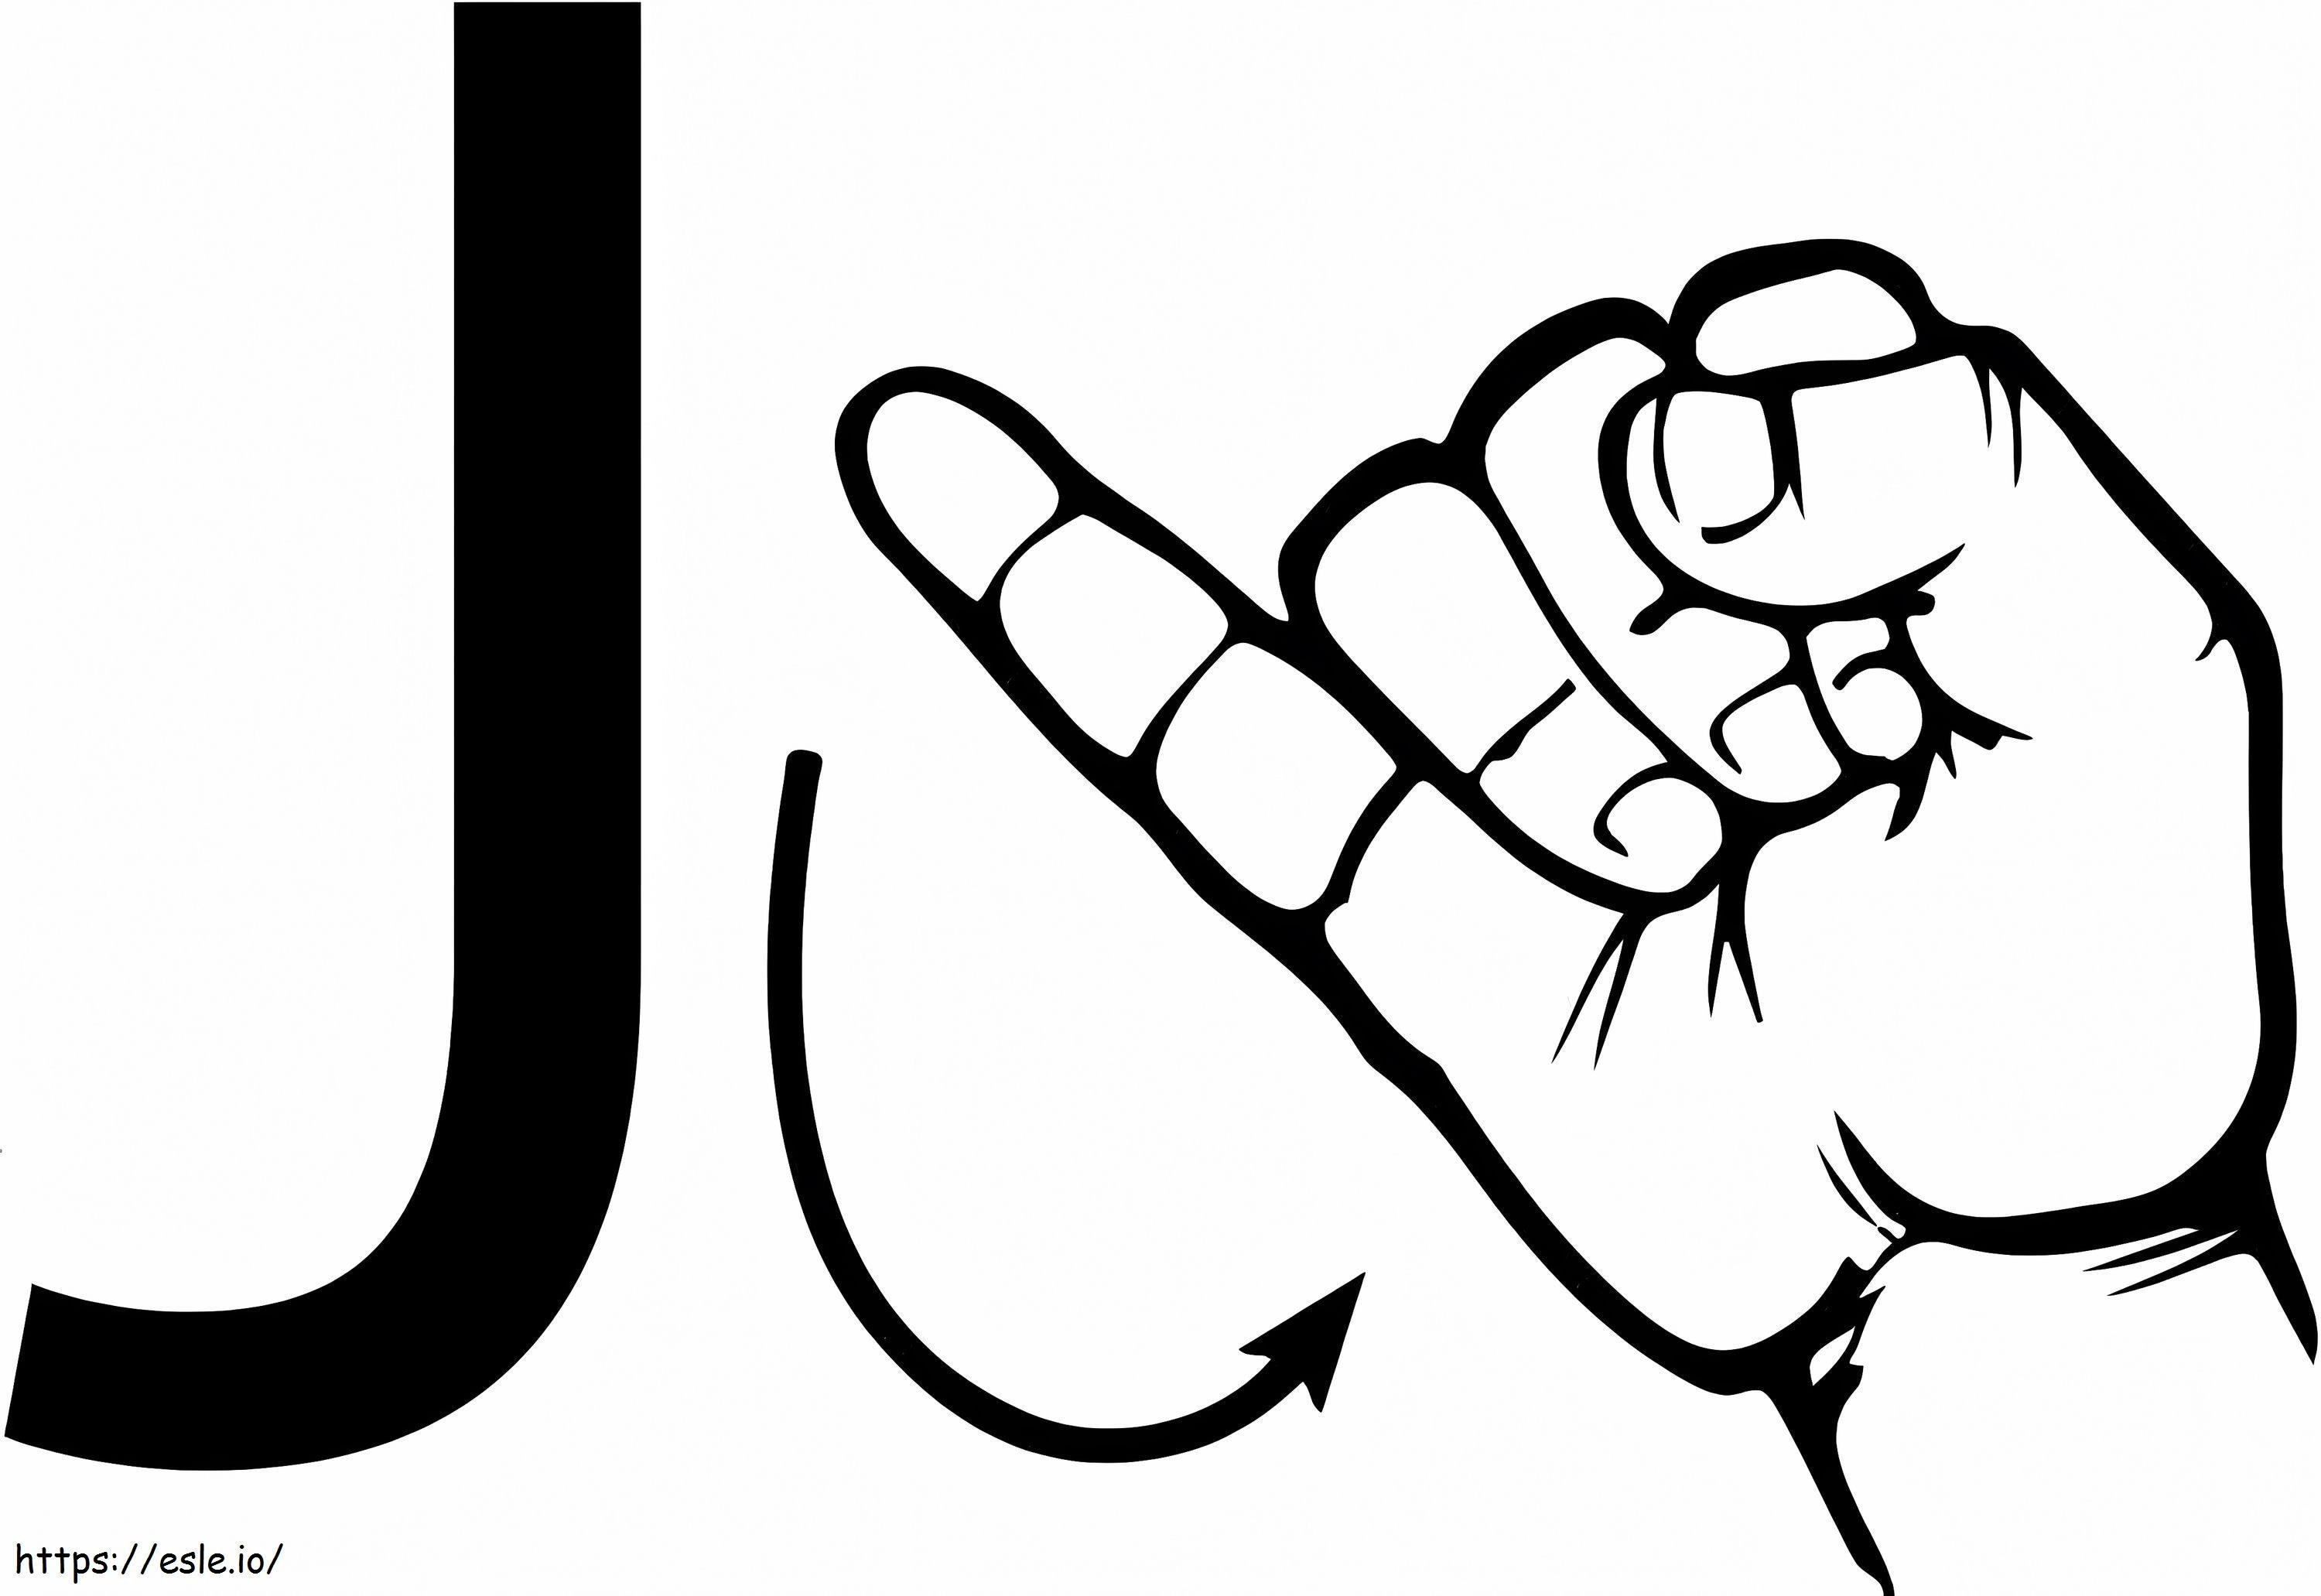 Letter J Hand coloring page